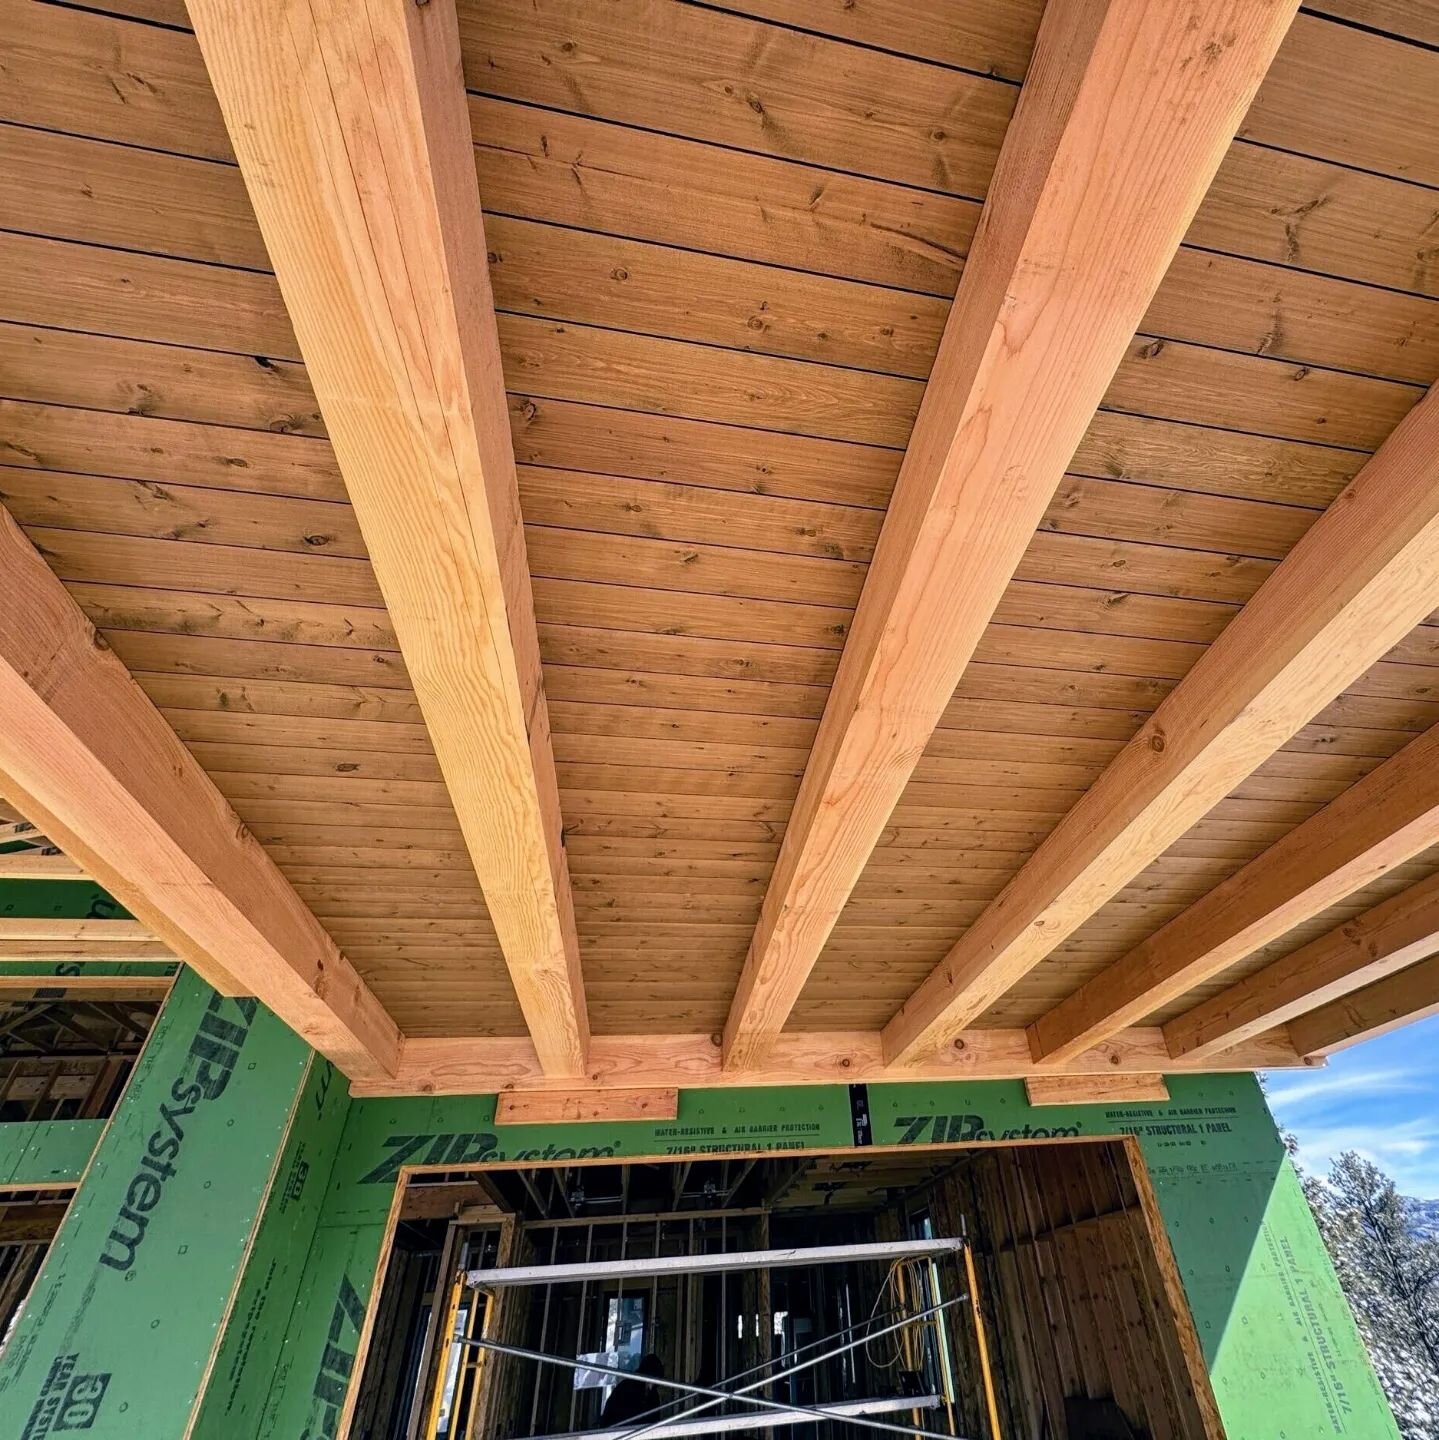 In construction we often can't wait to see the final result. But there is beauty in the process as well, in the interesting lines, organic materials, and infinite possibilities!! 

#itsallinthedetails #generalcontractor #fromthegroundup #construction